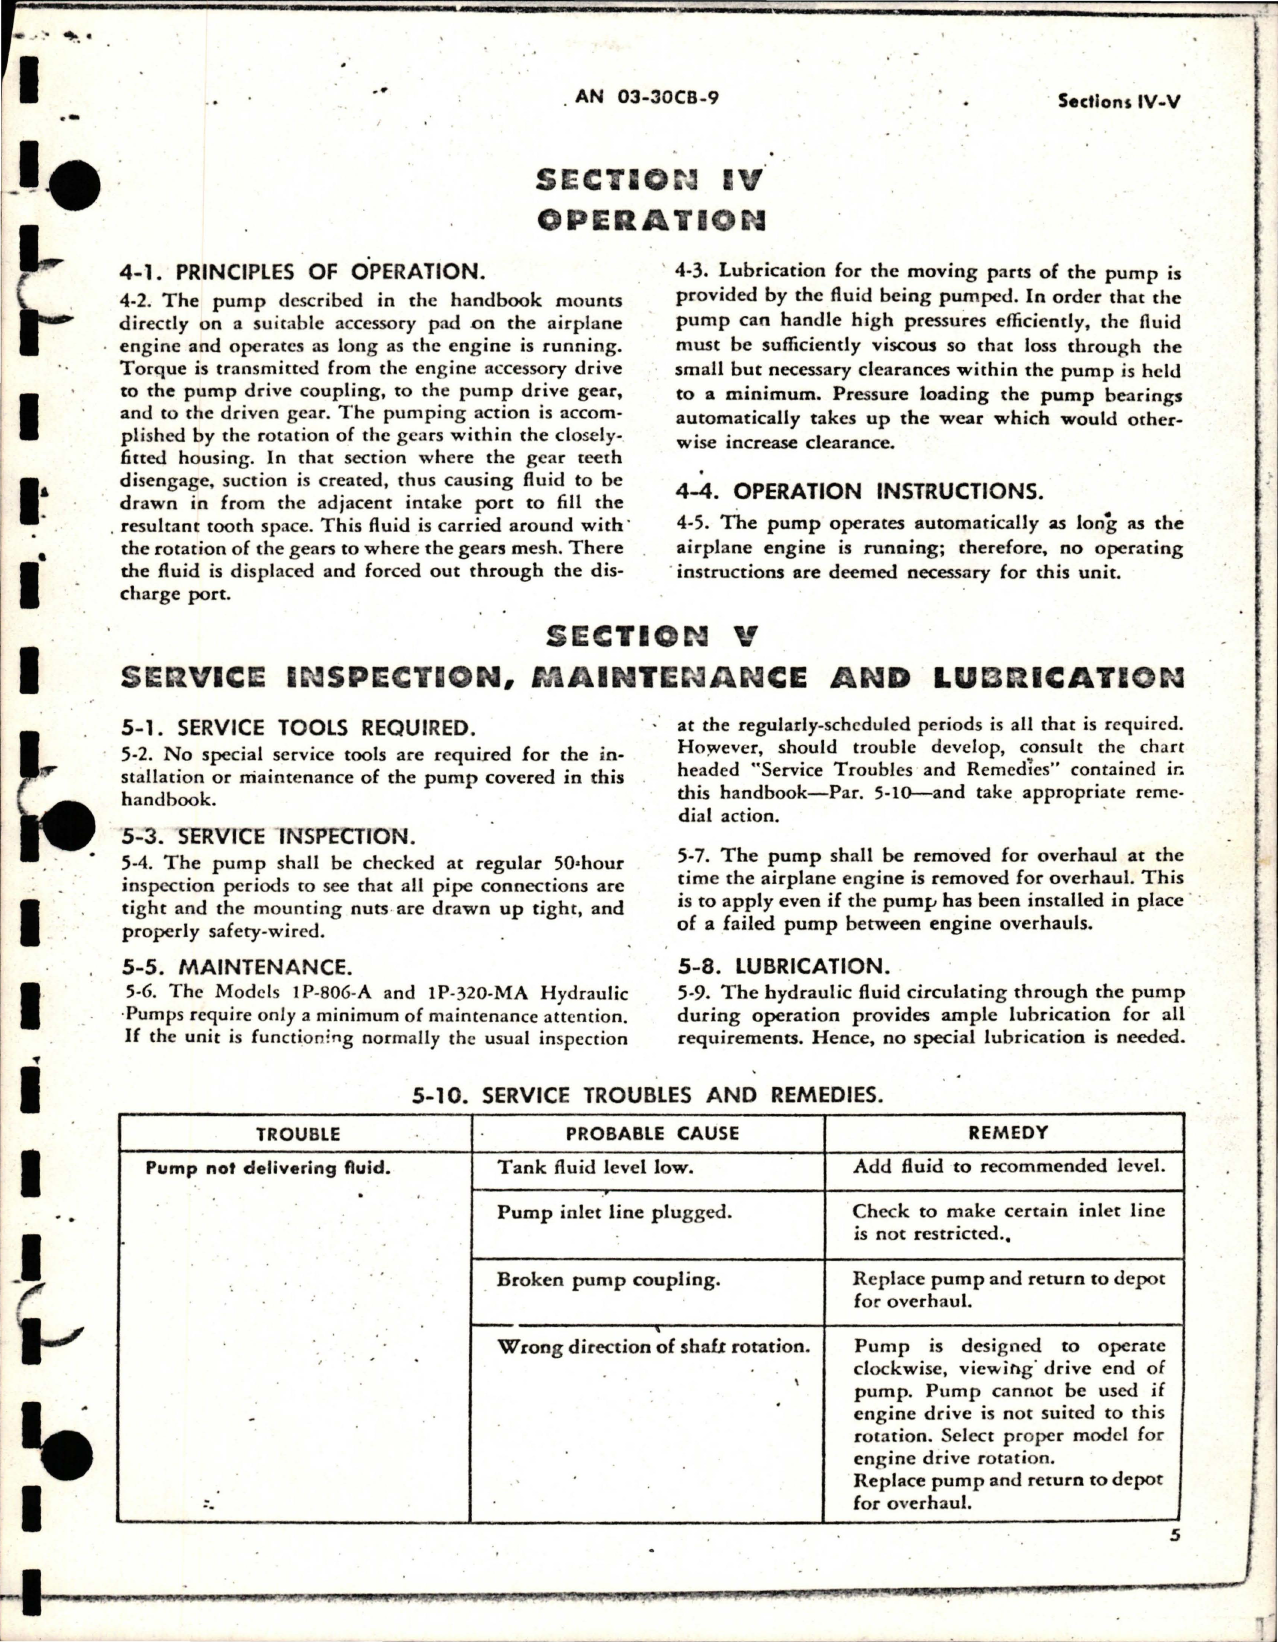 Sample page 7 from AirCorps Library document: Operation and Service Instructions for Pressure Loaded, Engine Driven, Gear Type Hydraulic Pumps - Models 1P-806-A and 1P-320-MA